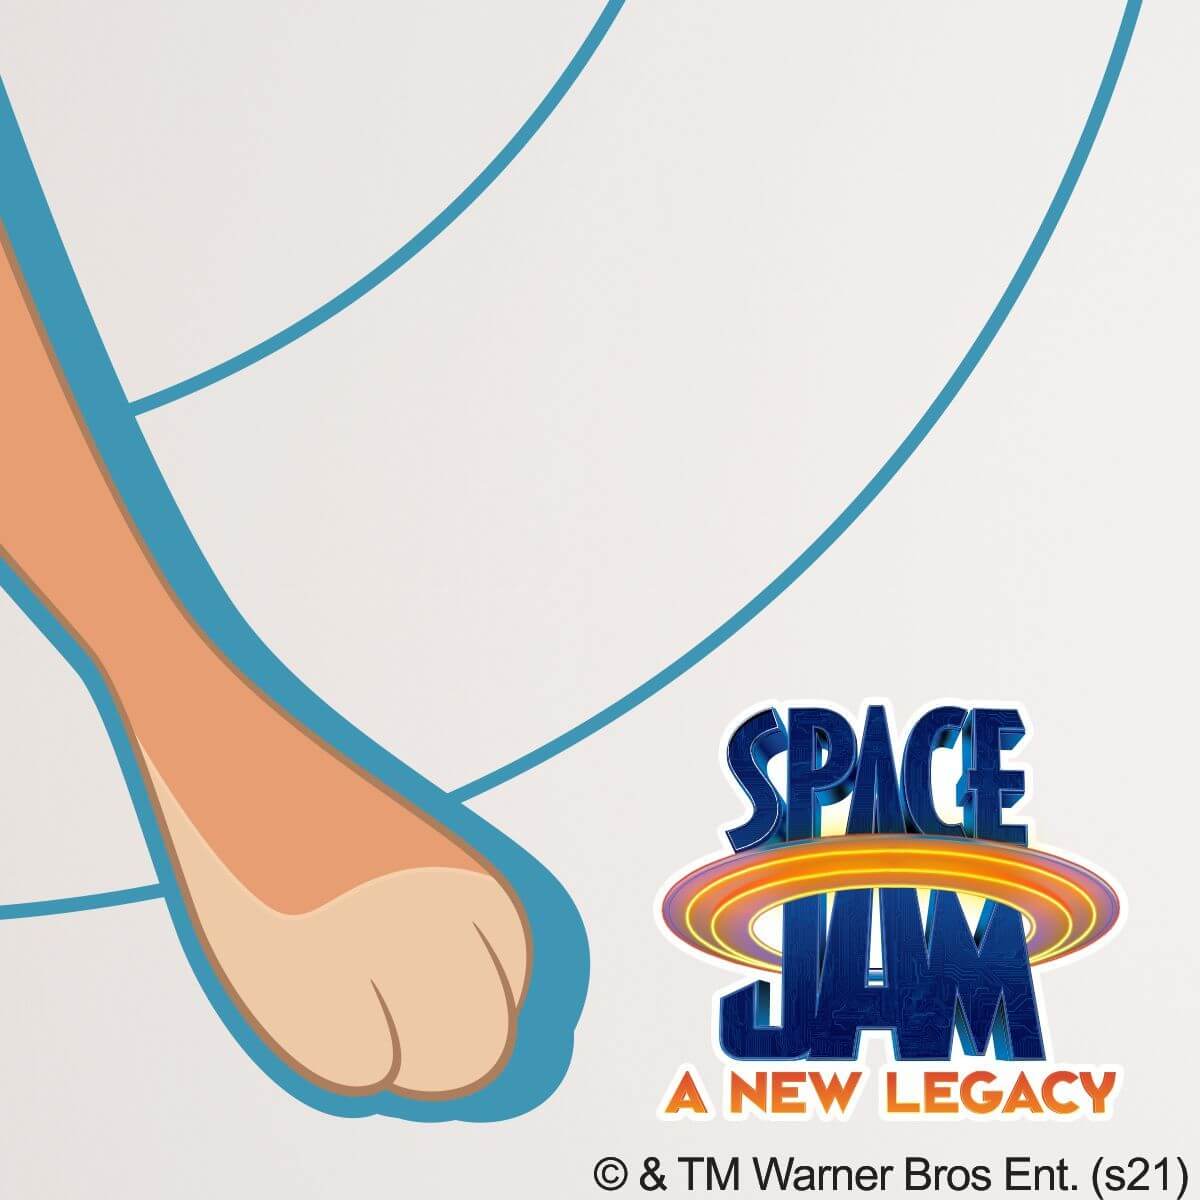 Kismet Decals Space Jam: A New Legacy Lola Bunny Baller Licensed Wall Sticker - Easy DIY Looney Tunes Home & Room Decor - Kismet Decals